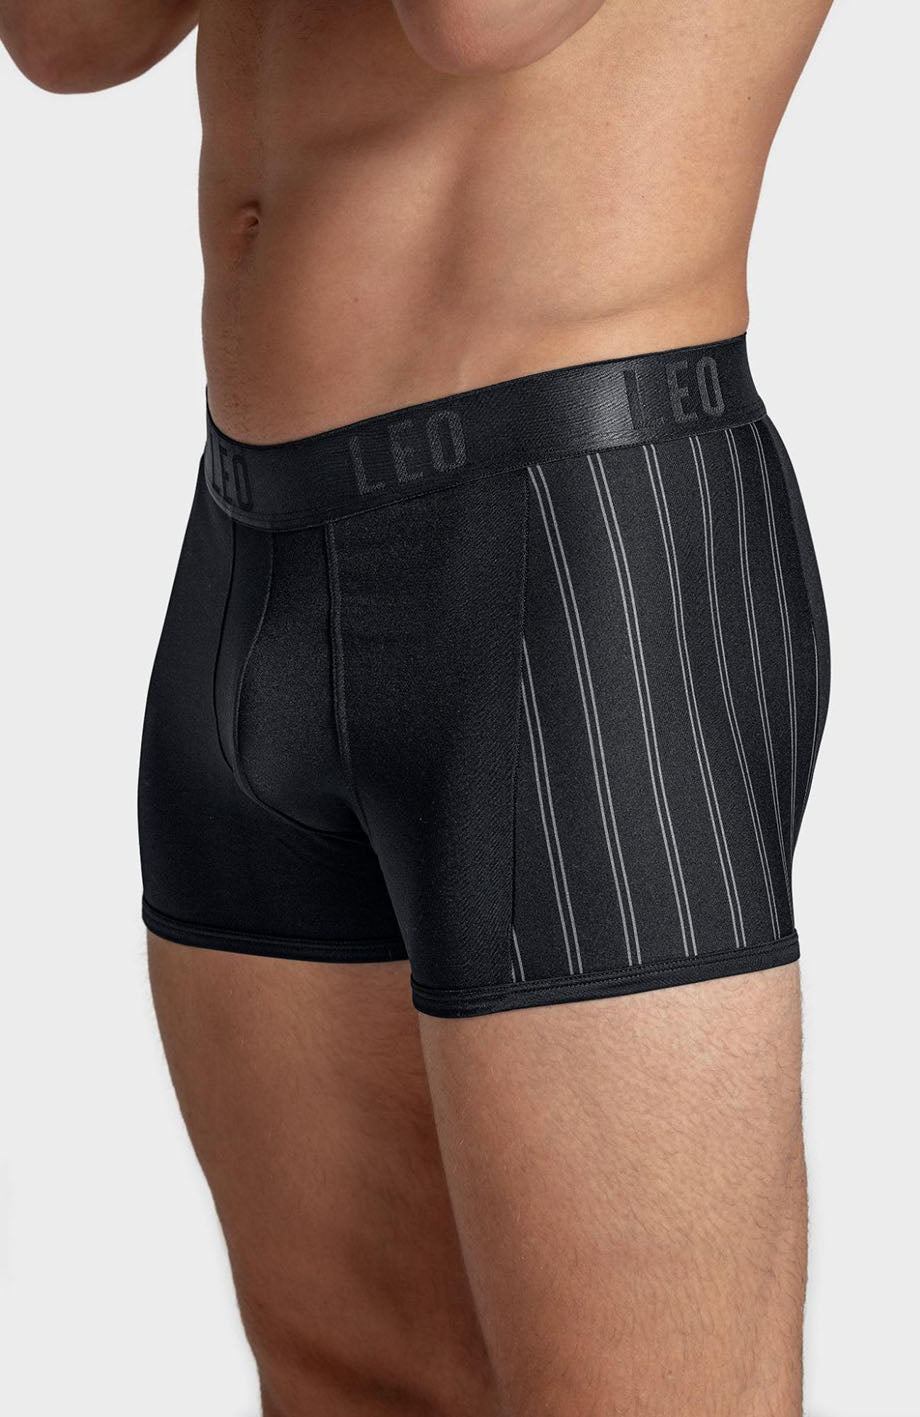 perfect fit boxer brief